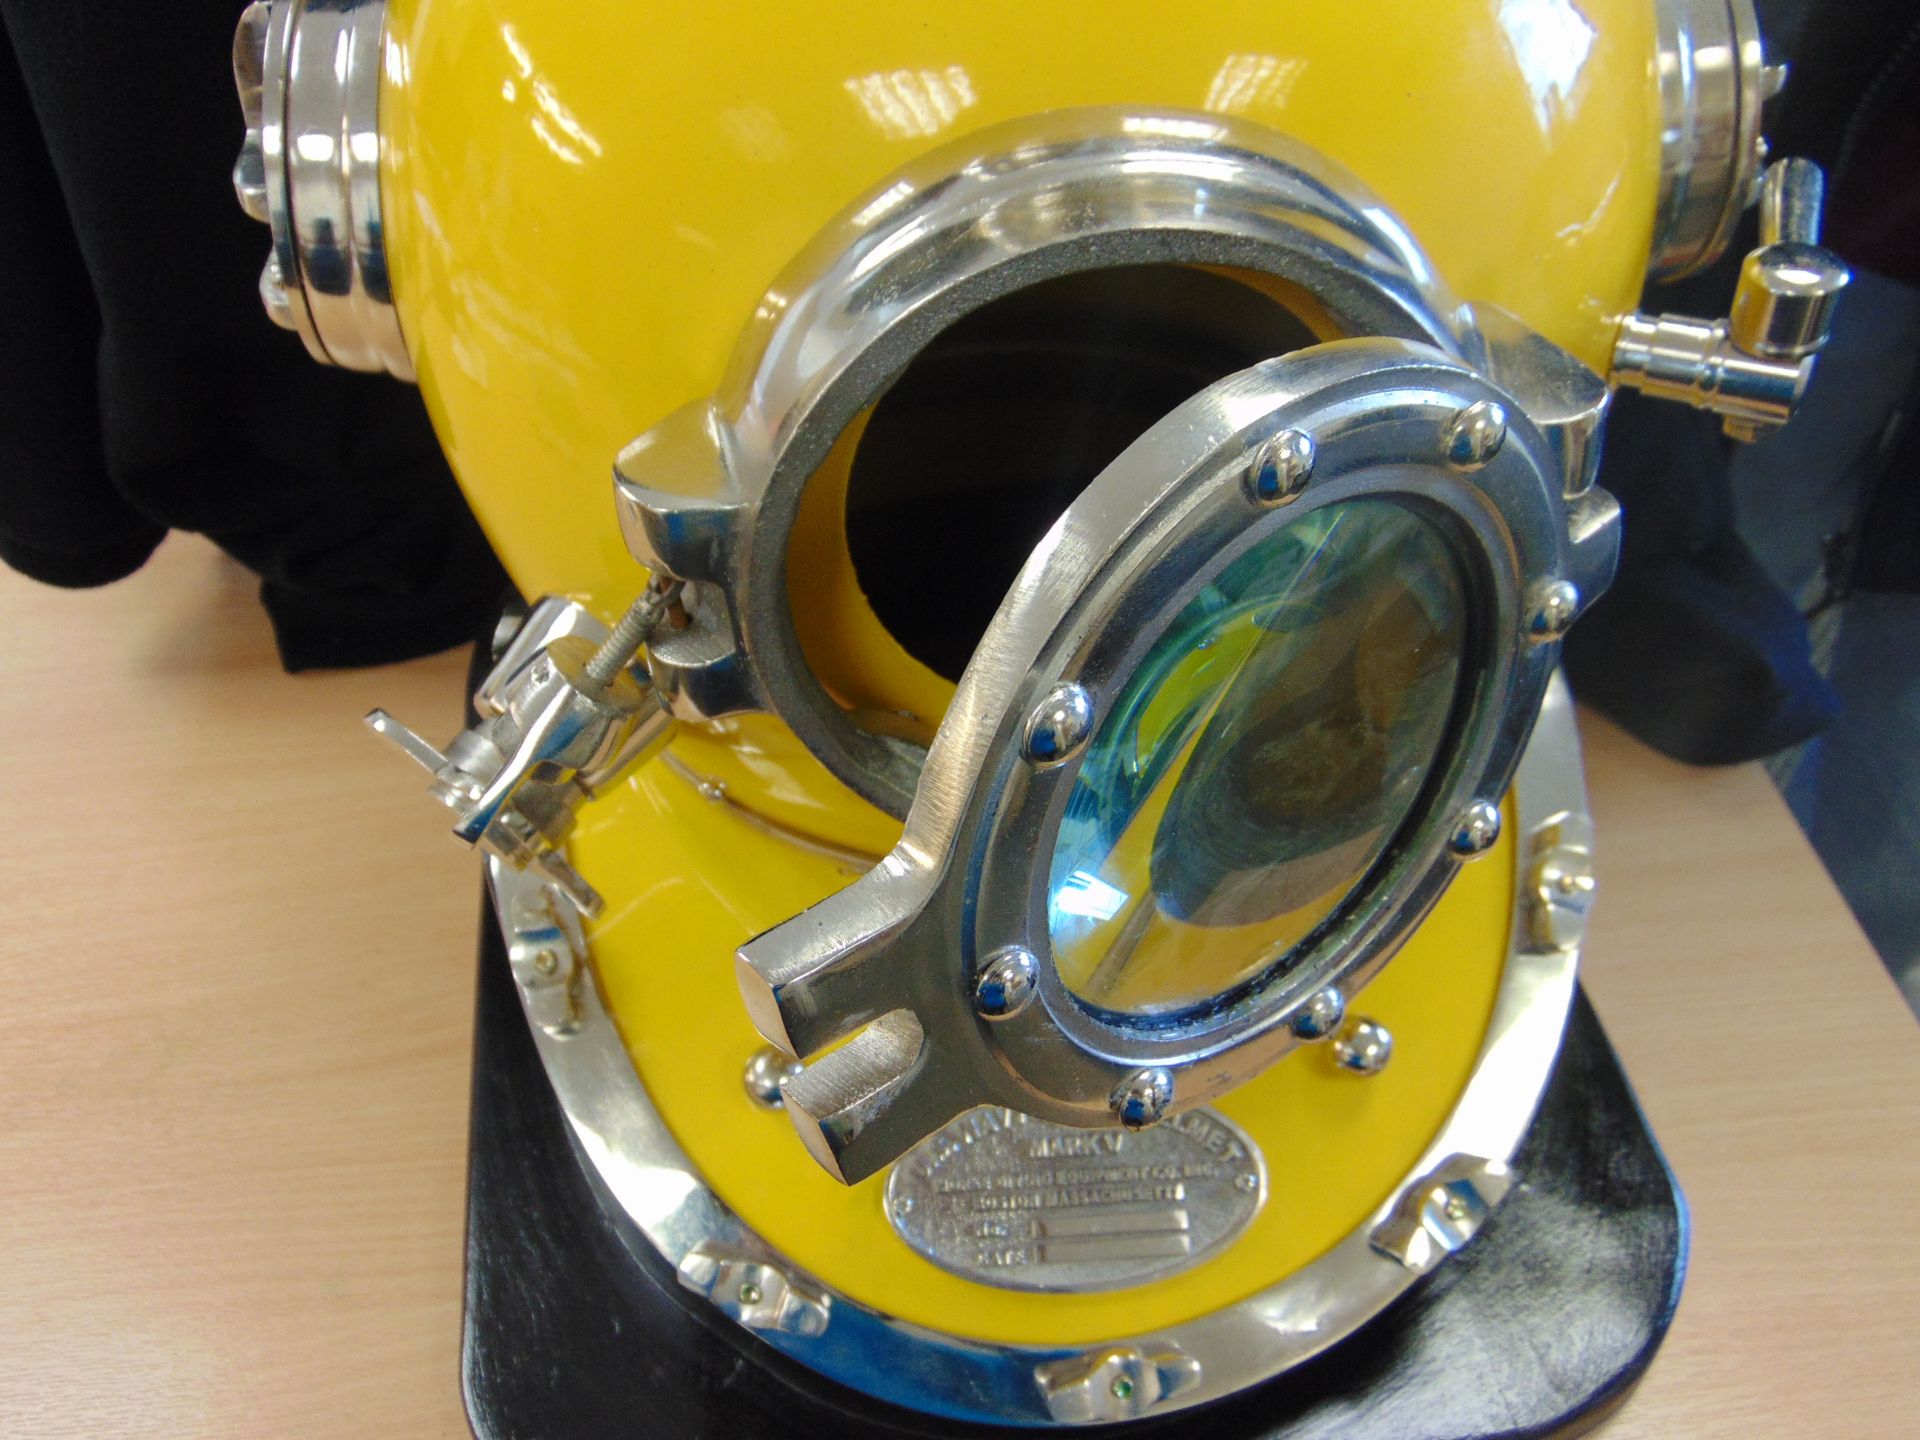 US NAVY MK 5 DIVING HELMET REPRO ON BASE 50 CMS X 40 CMS X 46 CMS - Image 4 of 7